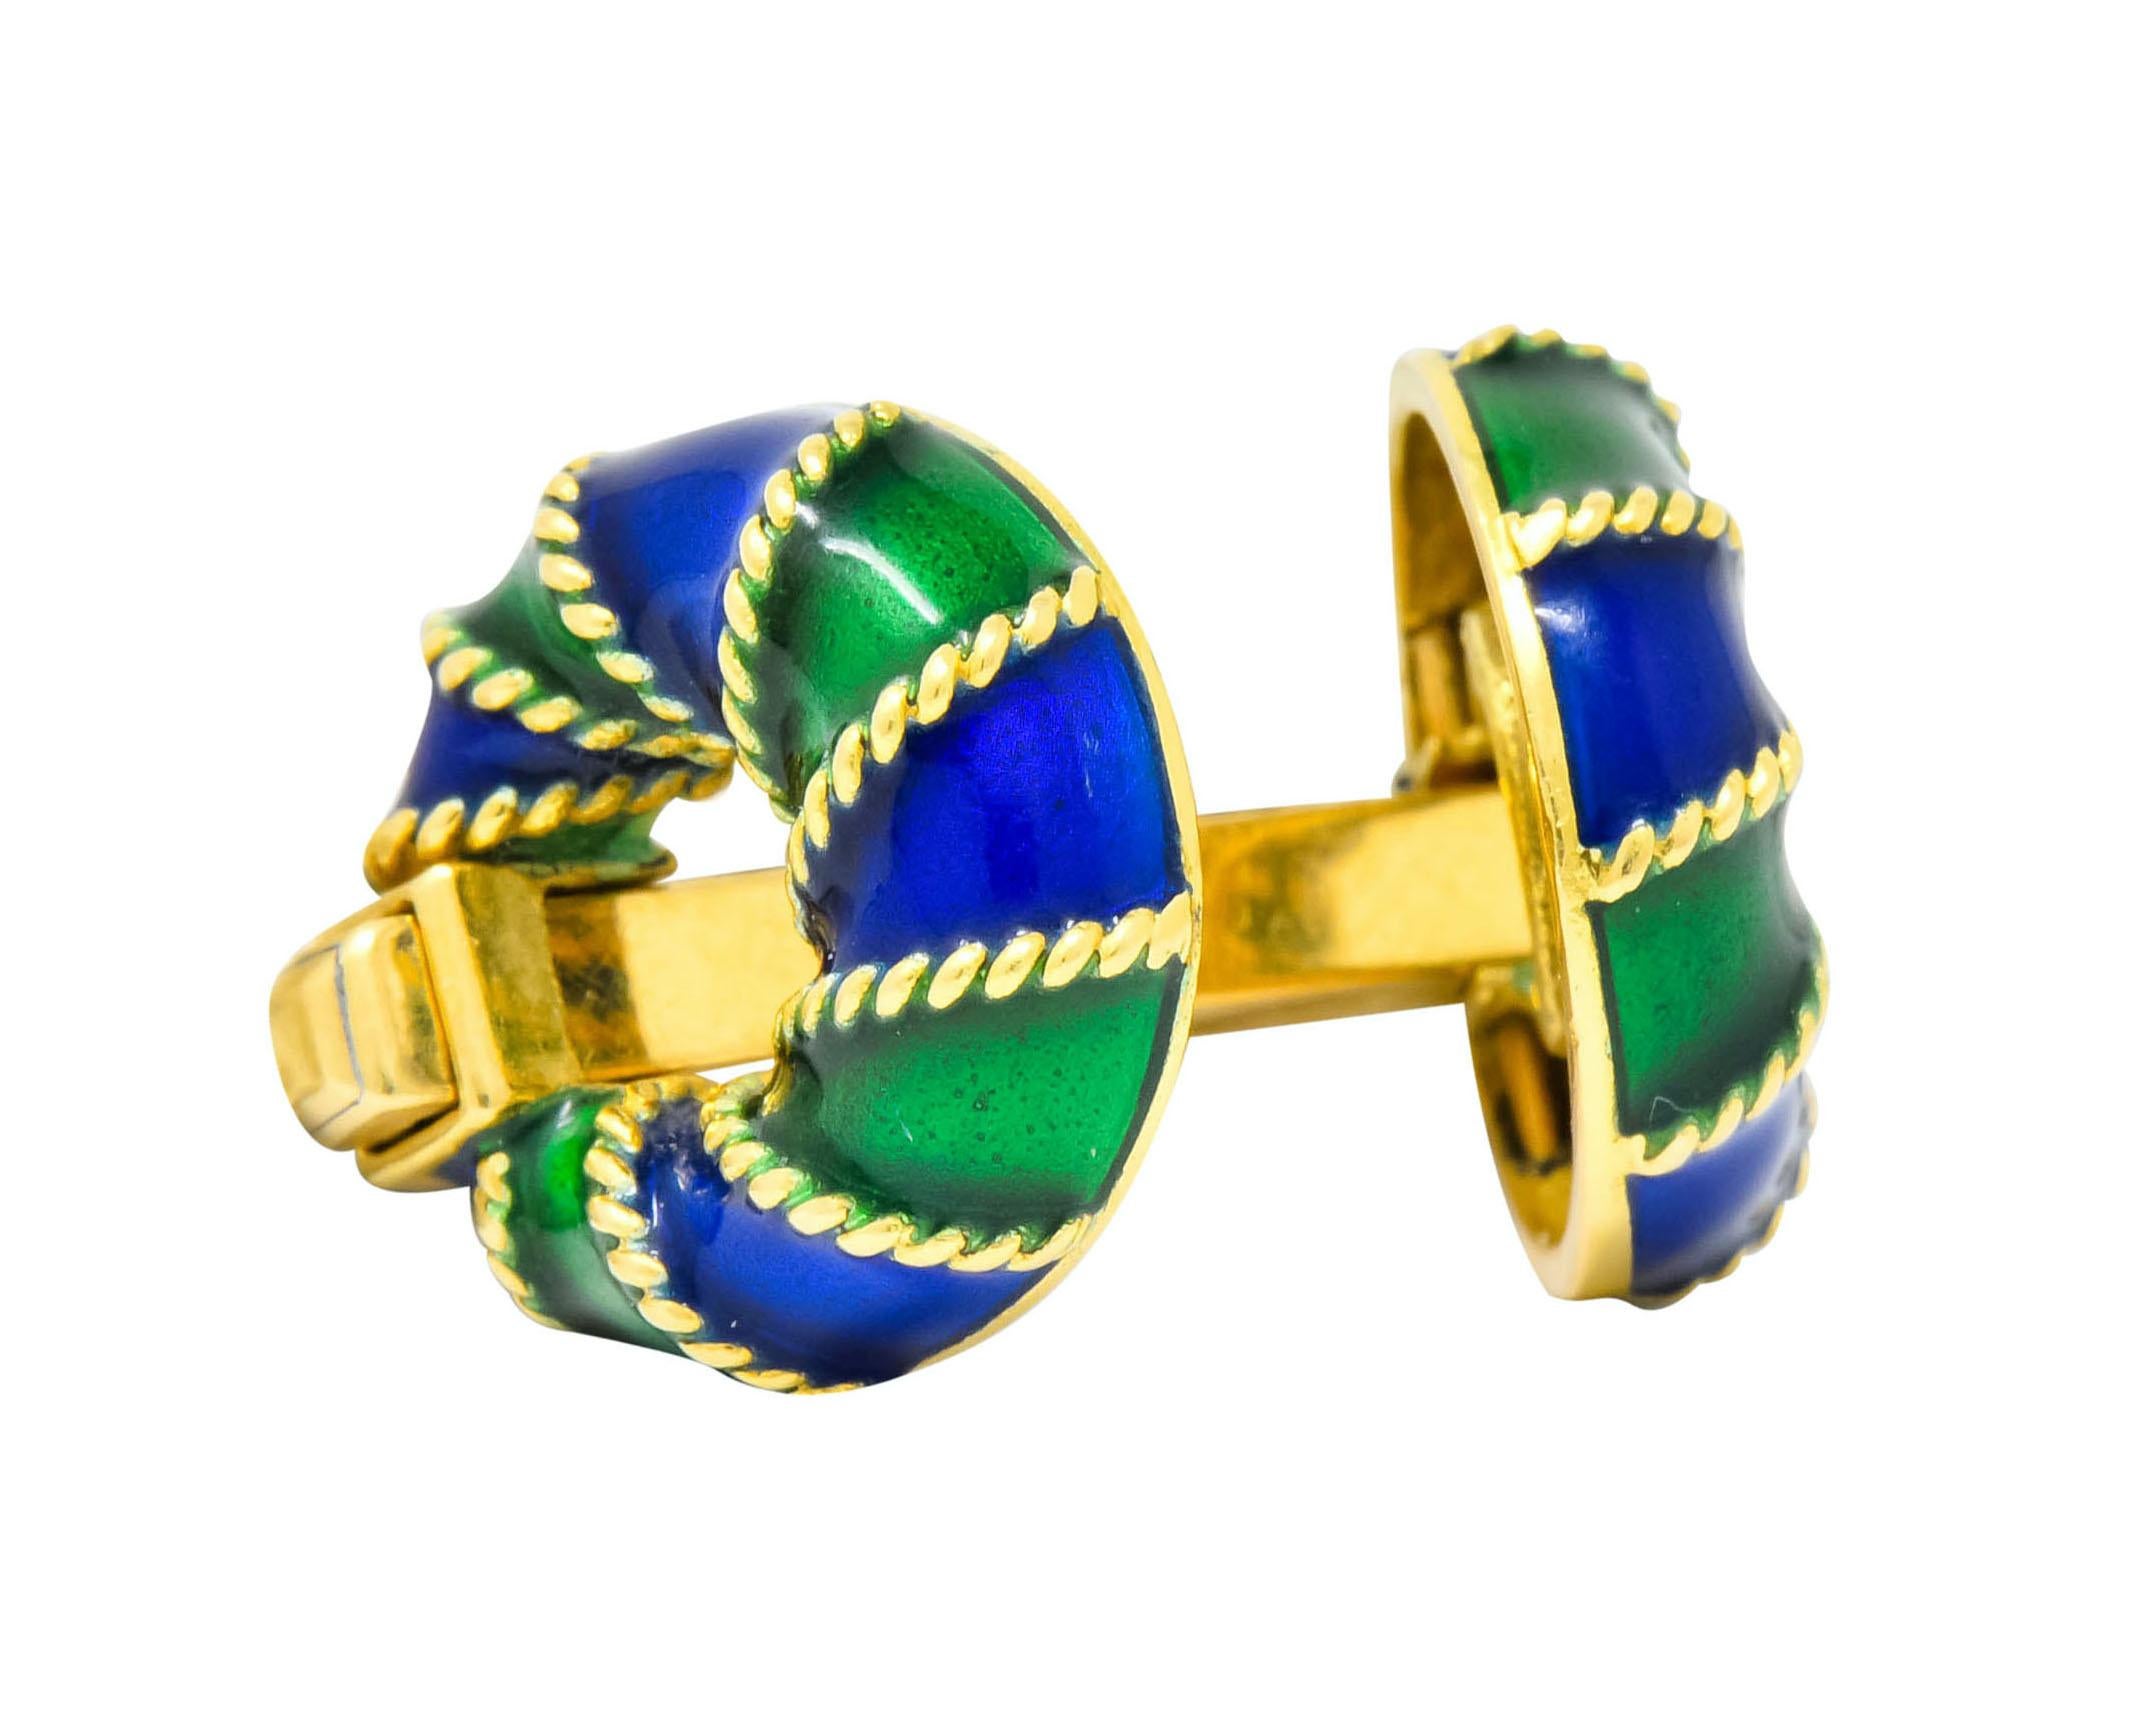 Cufflinks designed as gold bar terminating in two tori accented by a twisted cable motif throughout

With alternating green and blue enamel, exhibiting no loss

Completed by sliding, spring-loaded mechanism

Tested as 18 karat gold

Circa